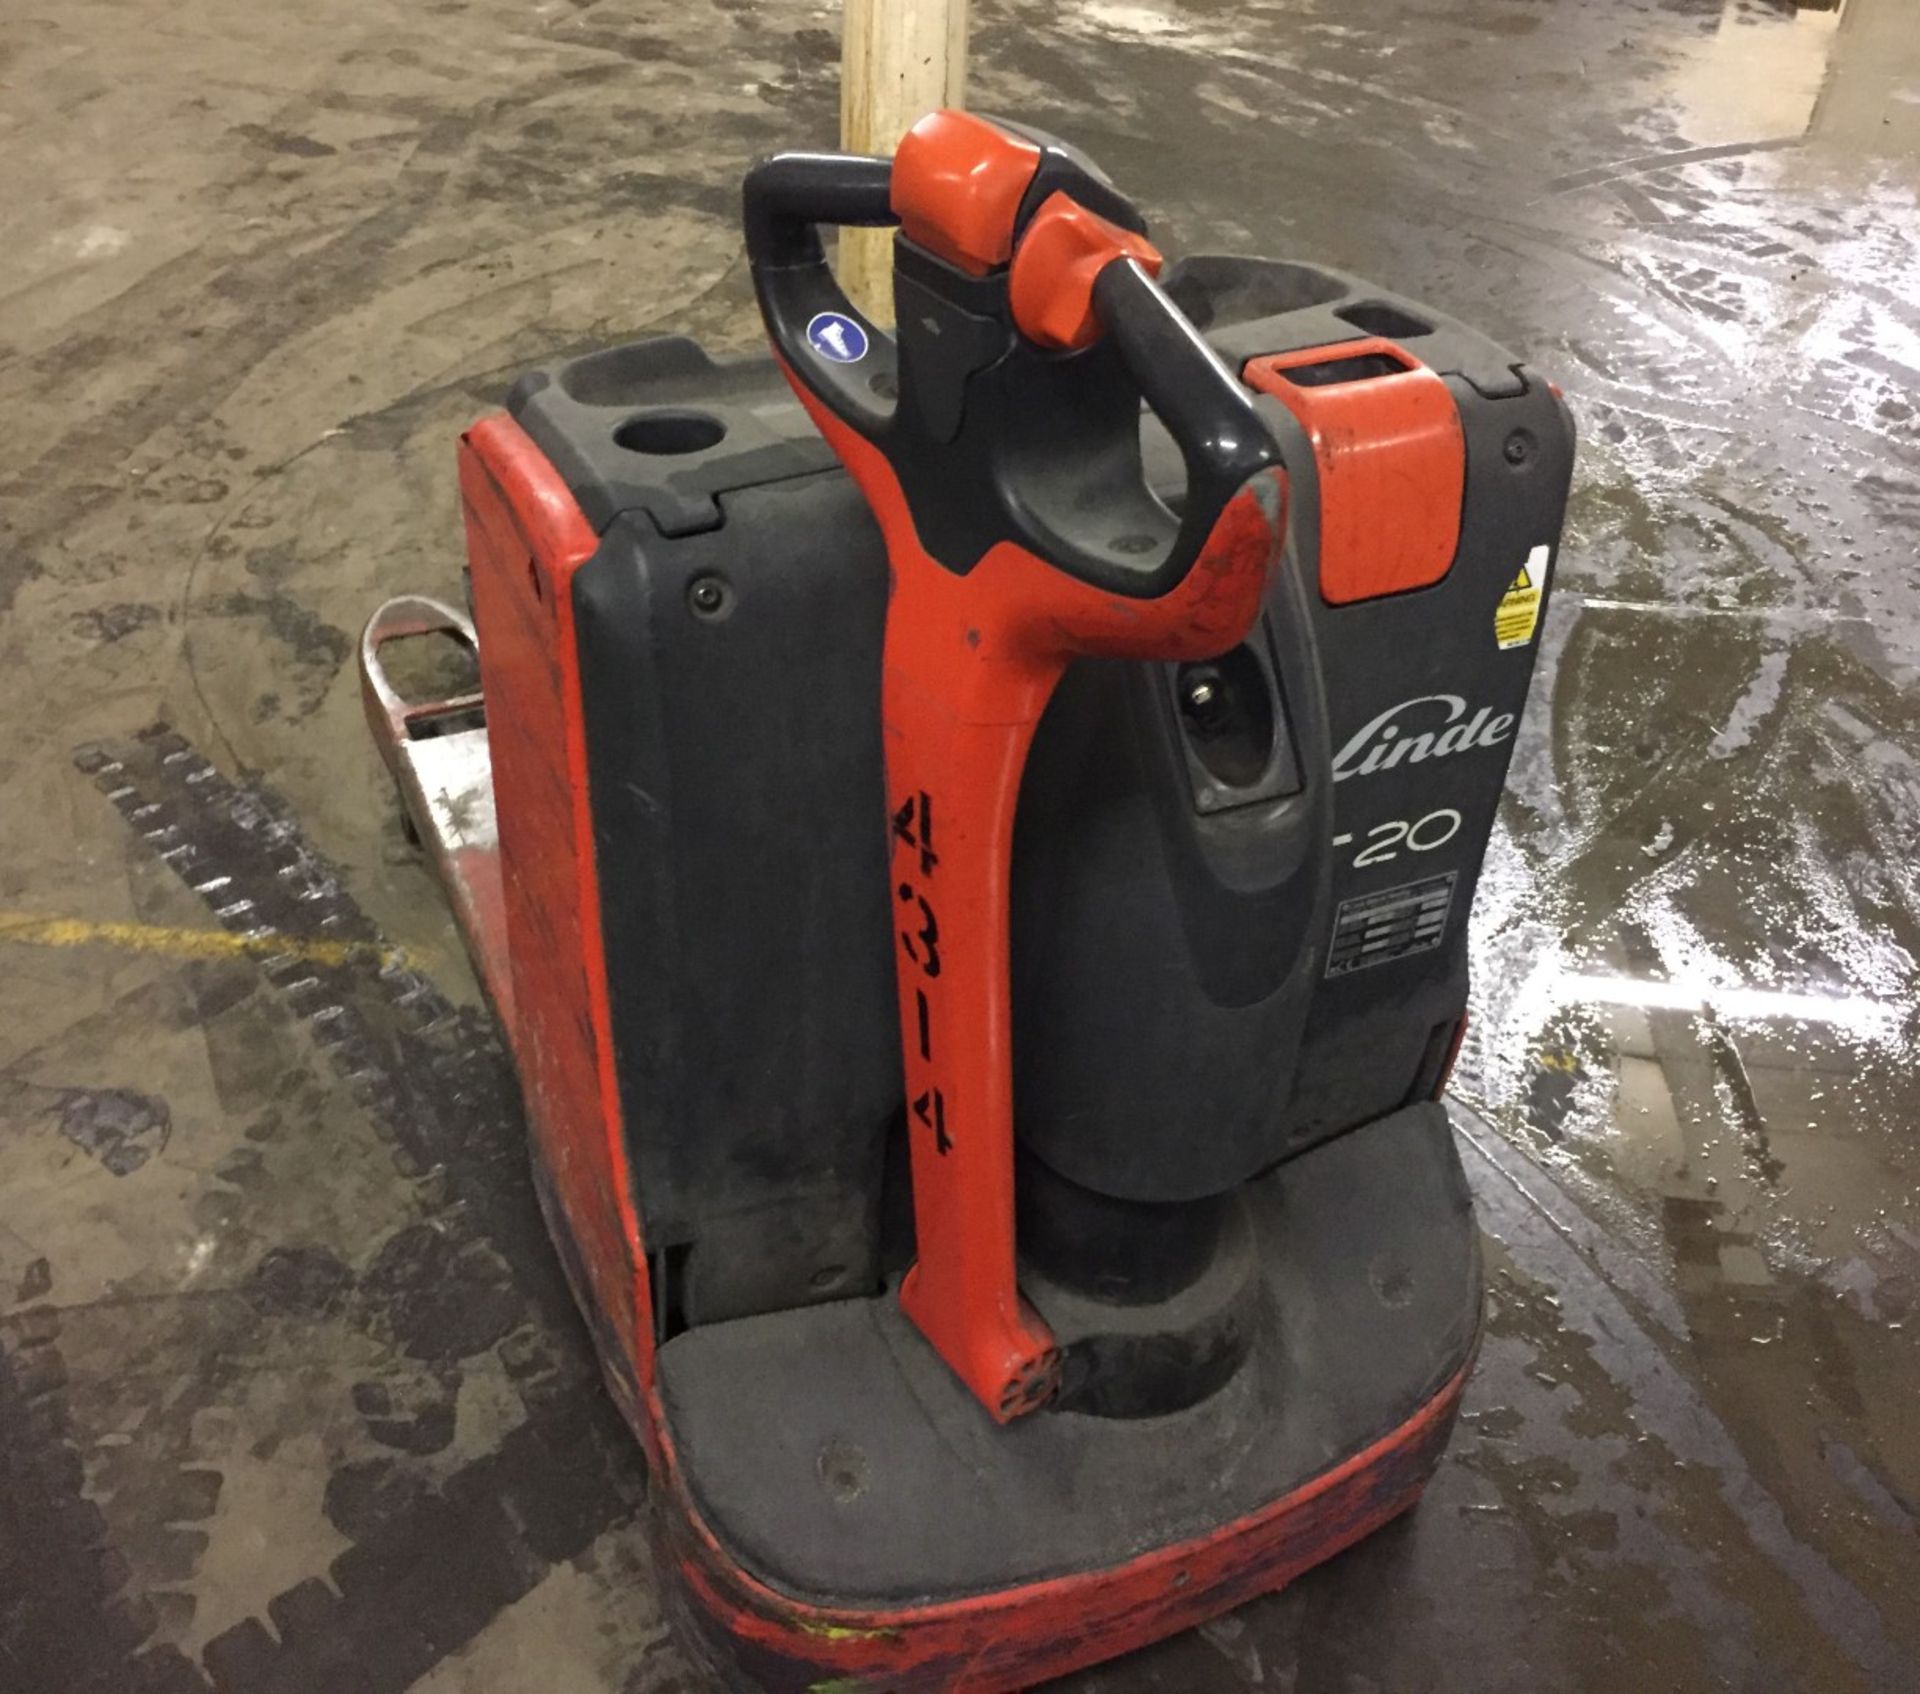 1 x Linde T20 Electric Pallet Truck - Tested and Working - Charger Included - CL007 - Ref: T20/1 - - Image 6 of 12